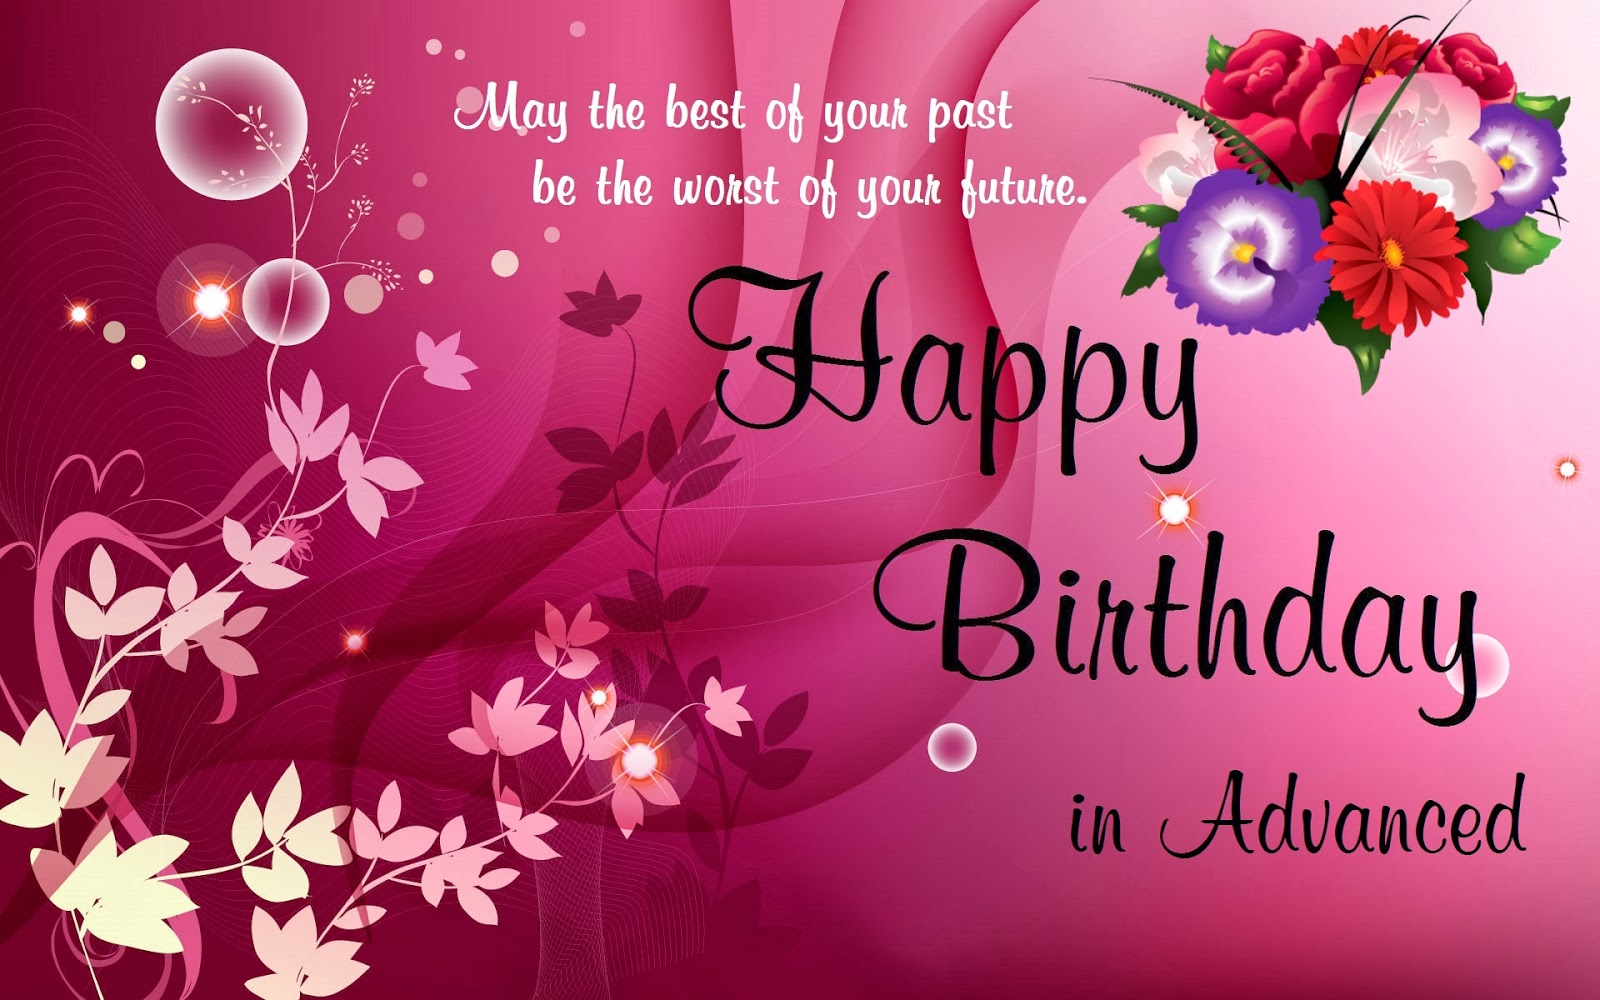 Download Hd Wallpapers Happy Birthday - Birthday Wishing Card For Best Friend , HD Wallpaper & Backgrounds